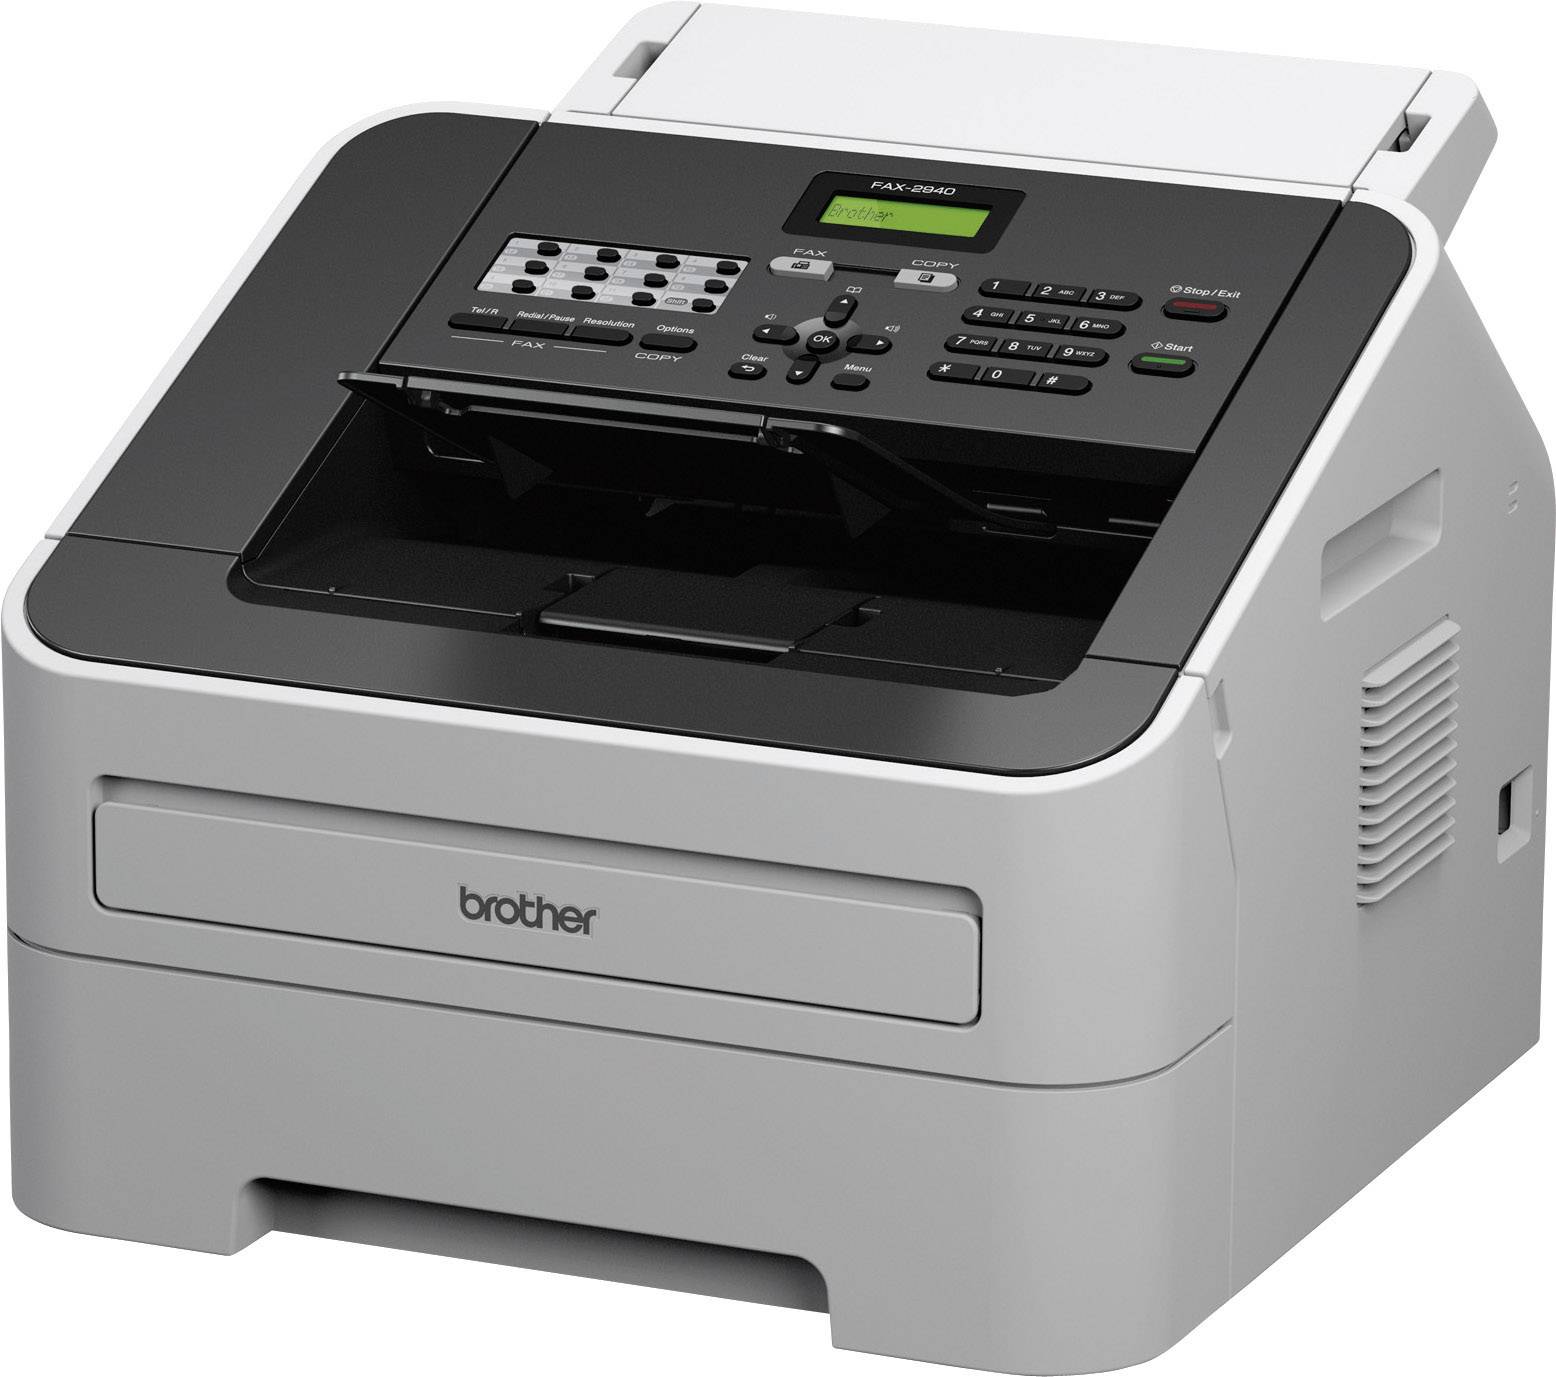 Brother Fax 2940 Laser Fax Machine 500 Sides Page Memory 30